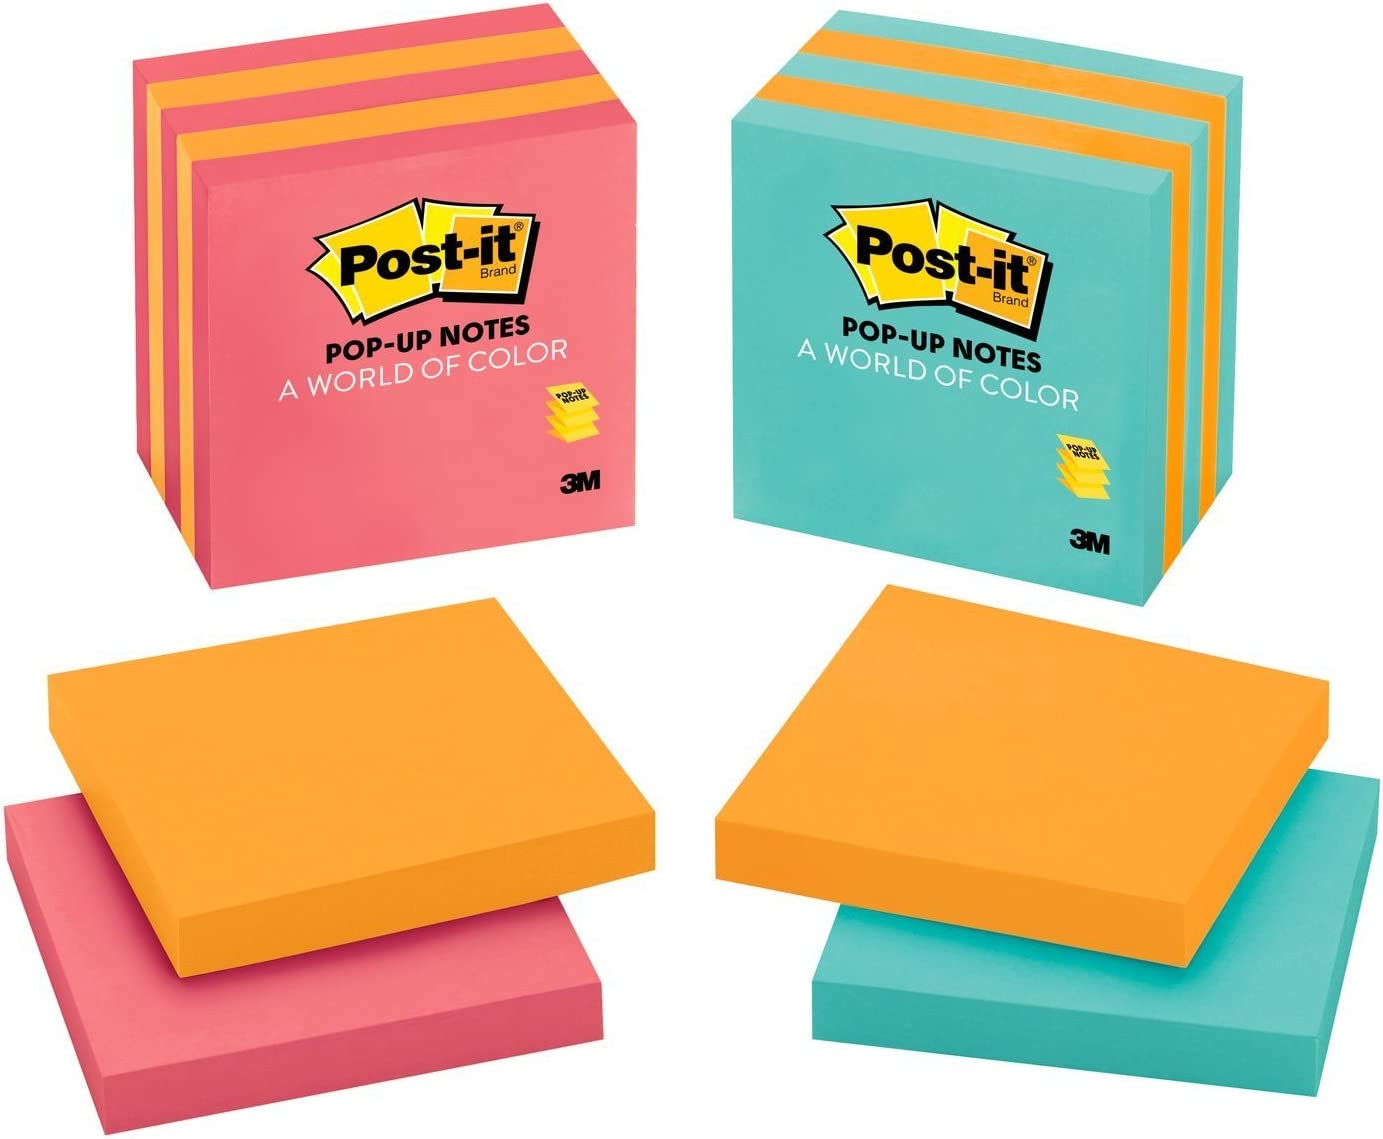 ''POST-IT Pop-up NOTES, 3x3 in, 5 Pads, America's #1 Favorite Sticky NOTES, Assorted Colors, Clean Re